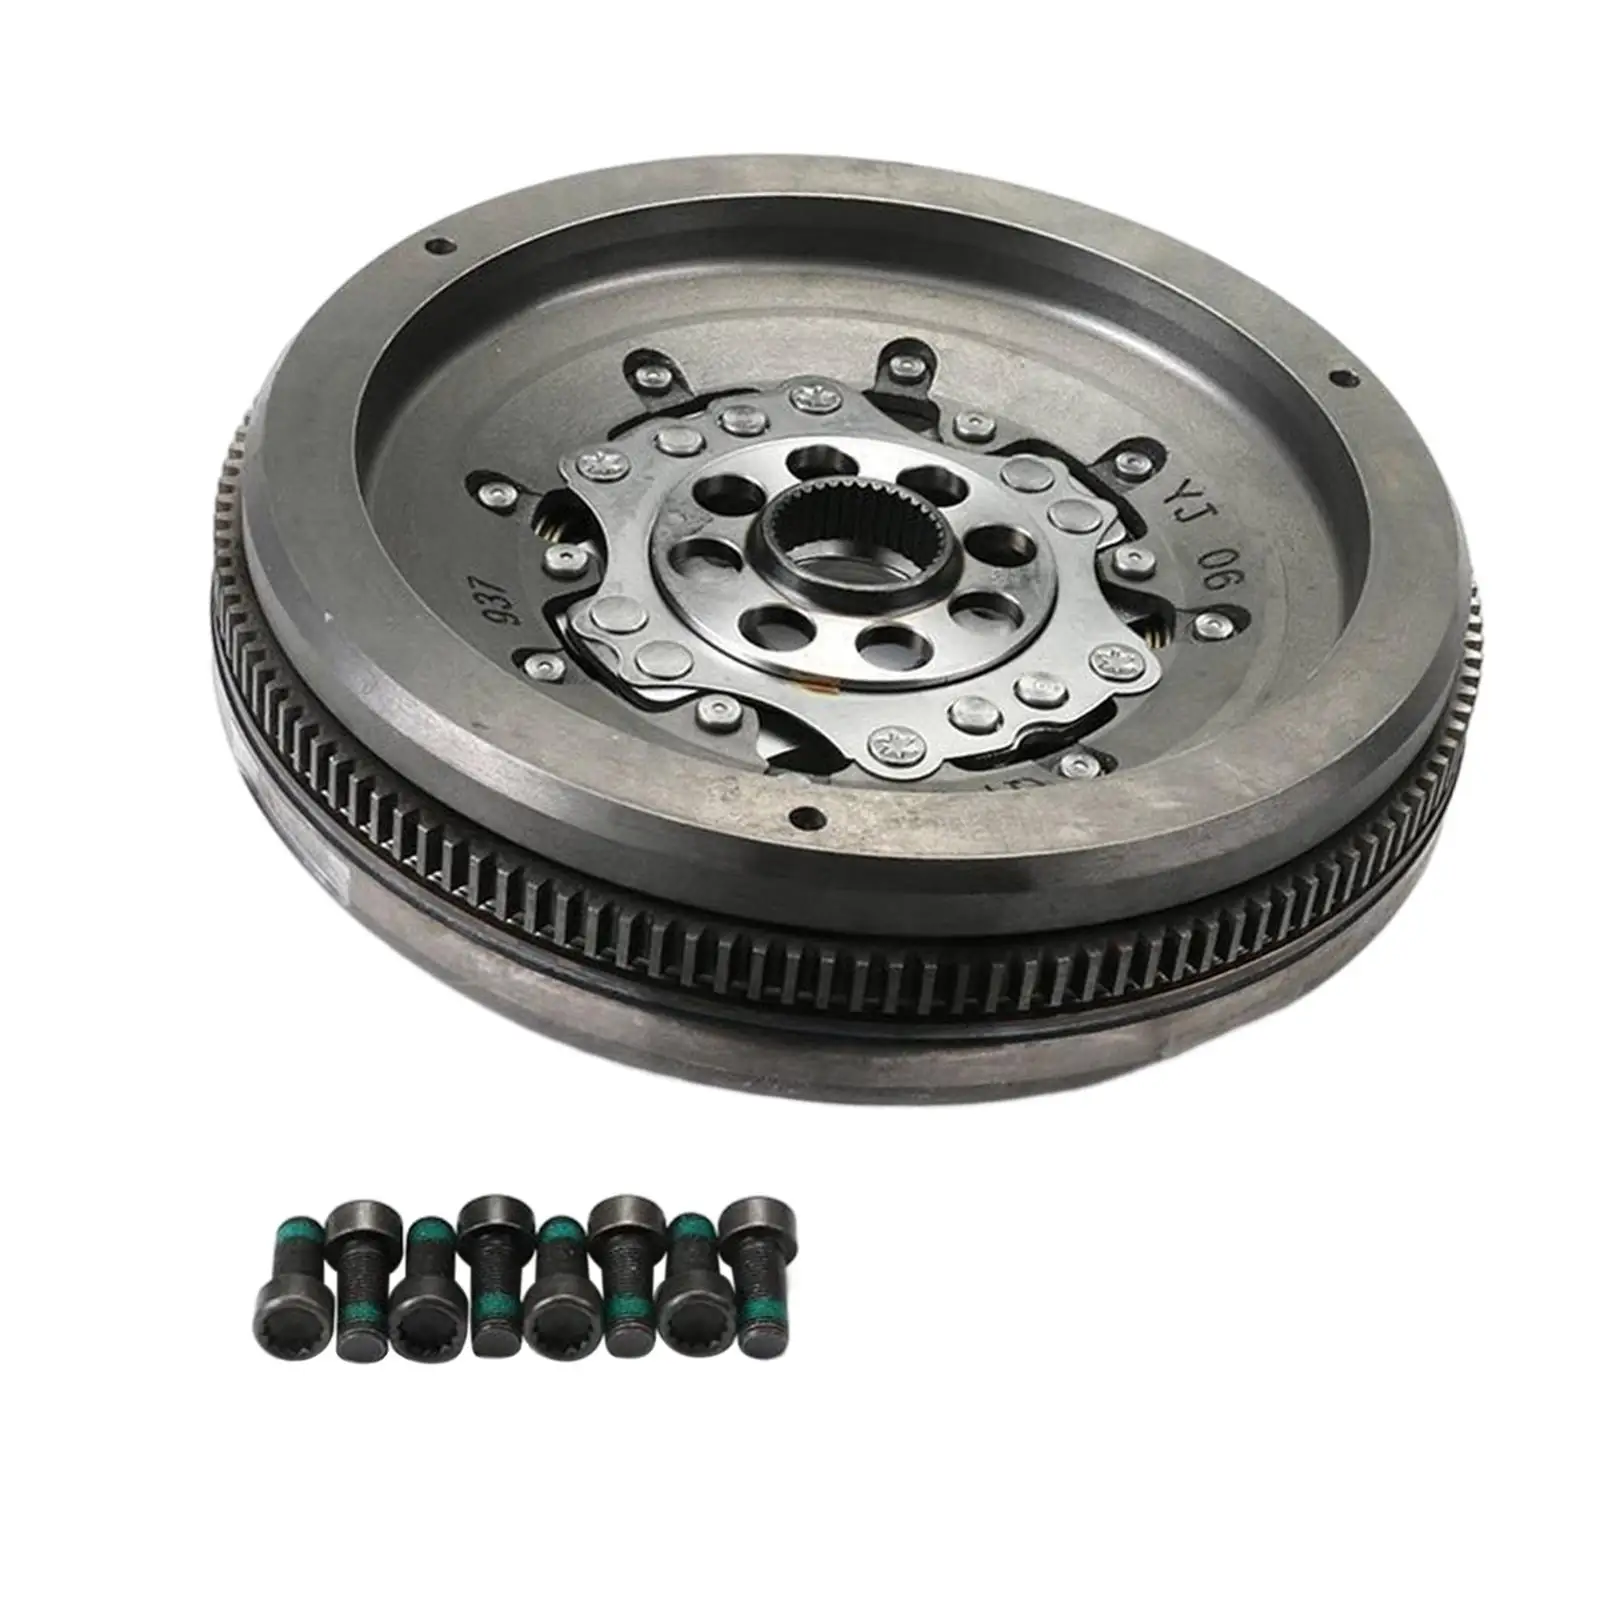 Vehicle Transmission Flywheel 02E Dq250 for Audi Accessories Durable